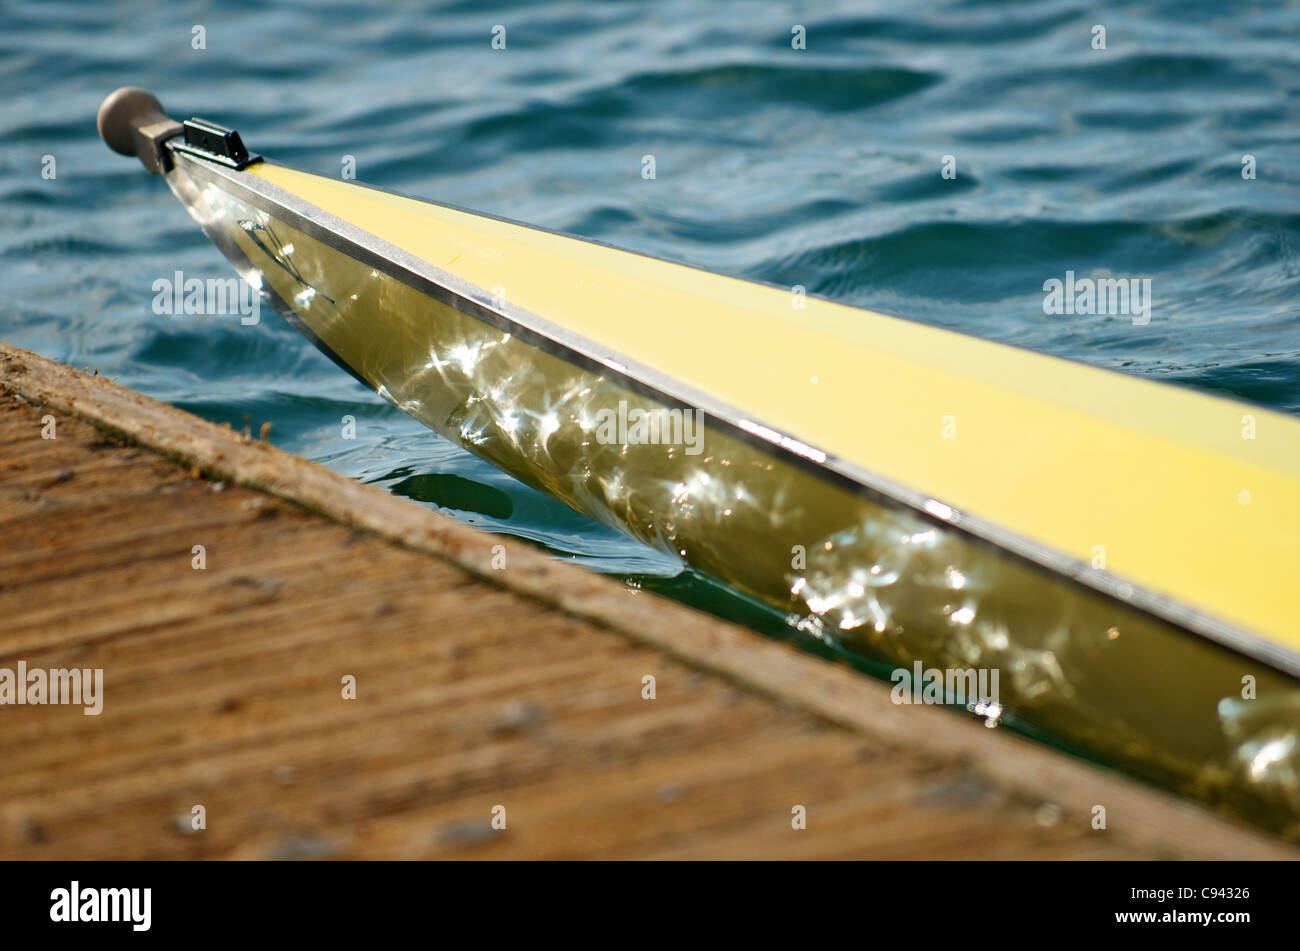 Detail of a scull rowboat and a dock. Stock Photo